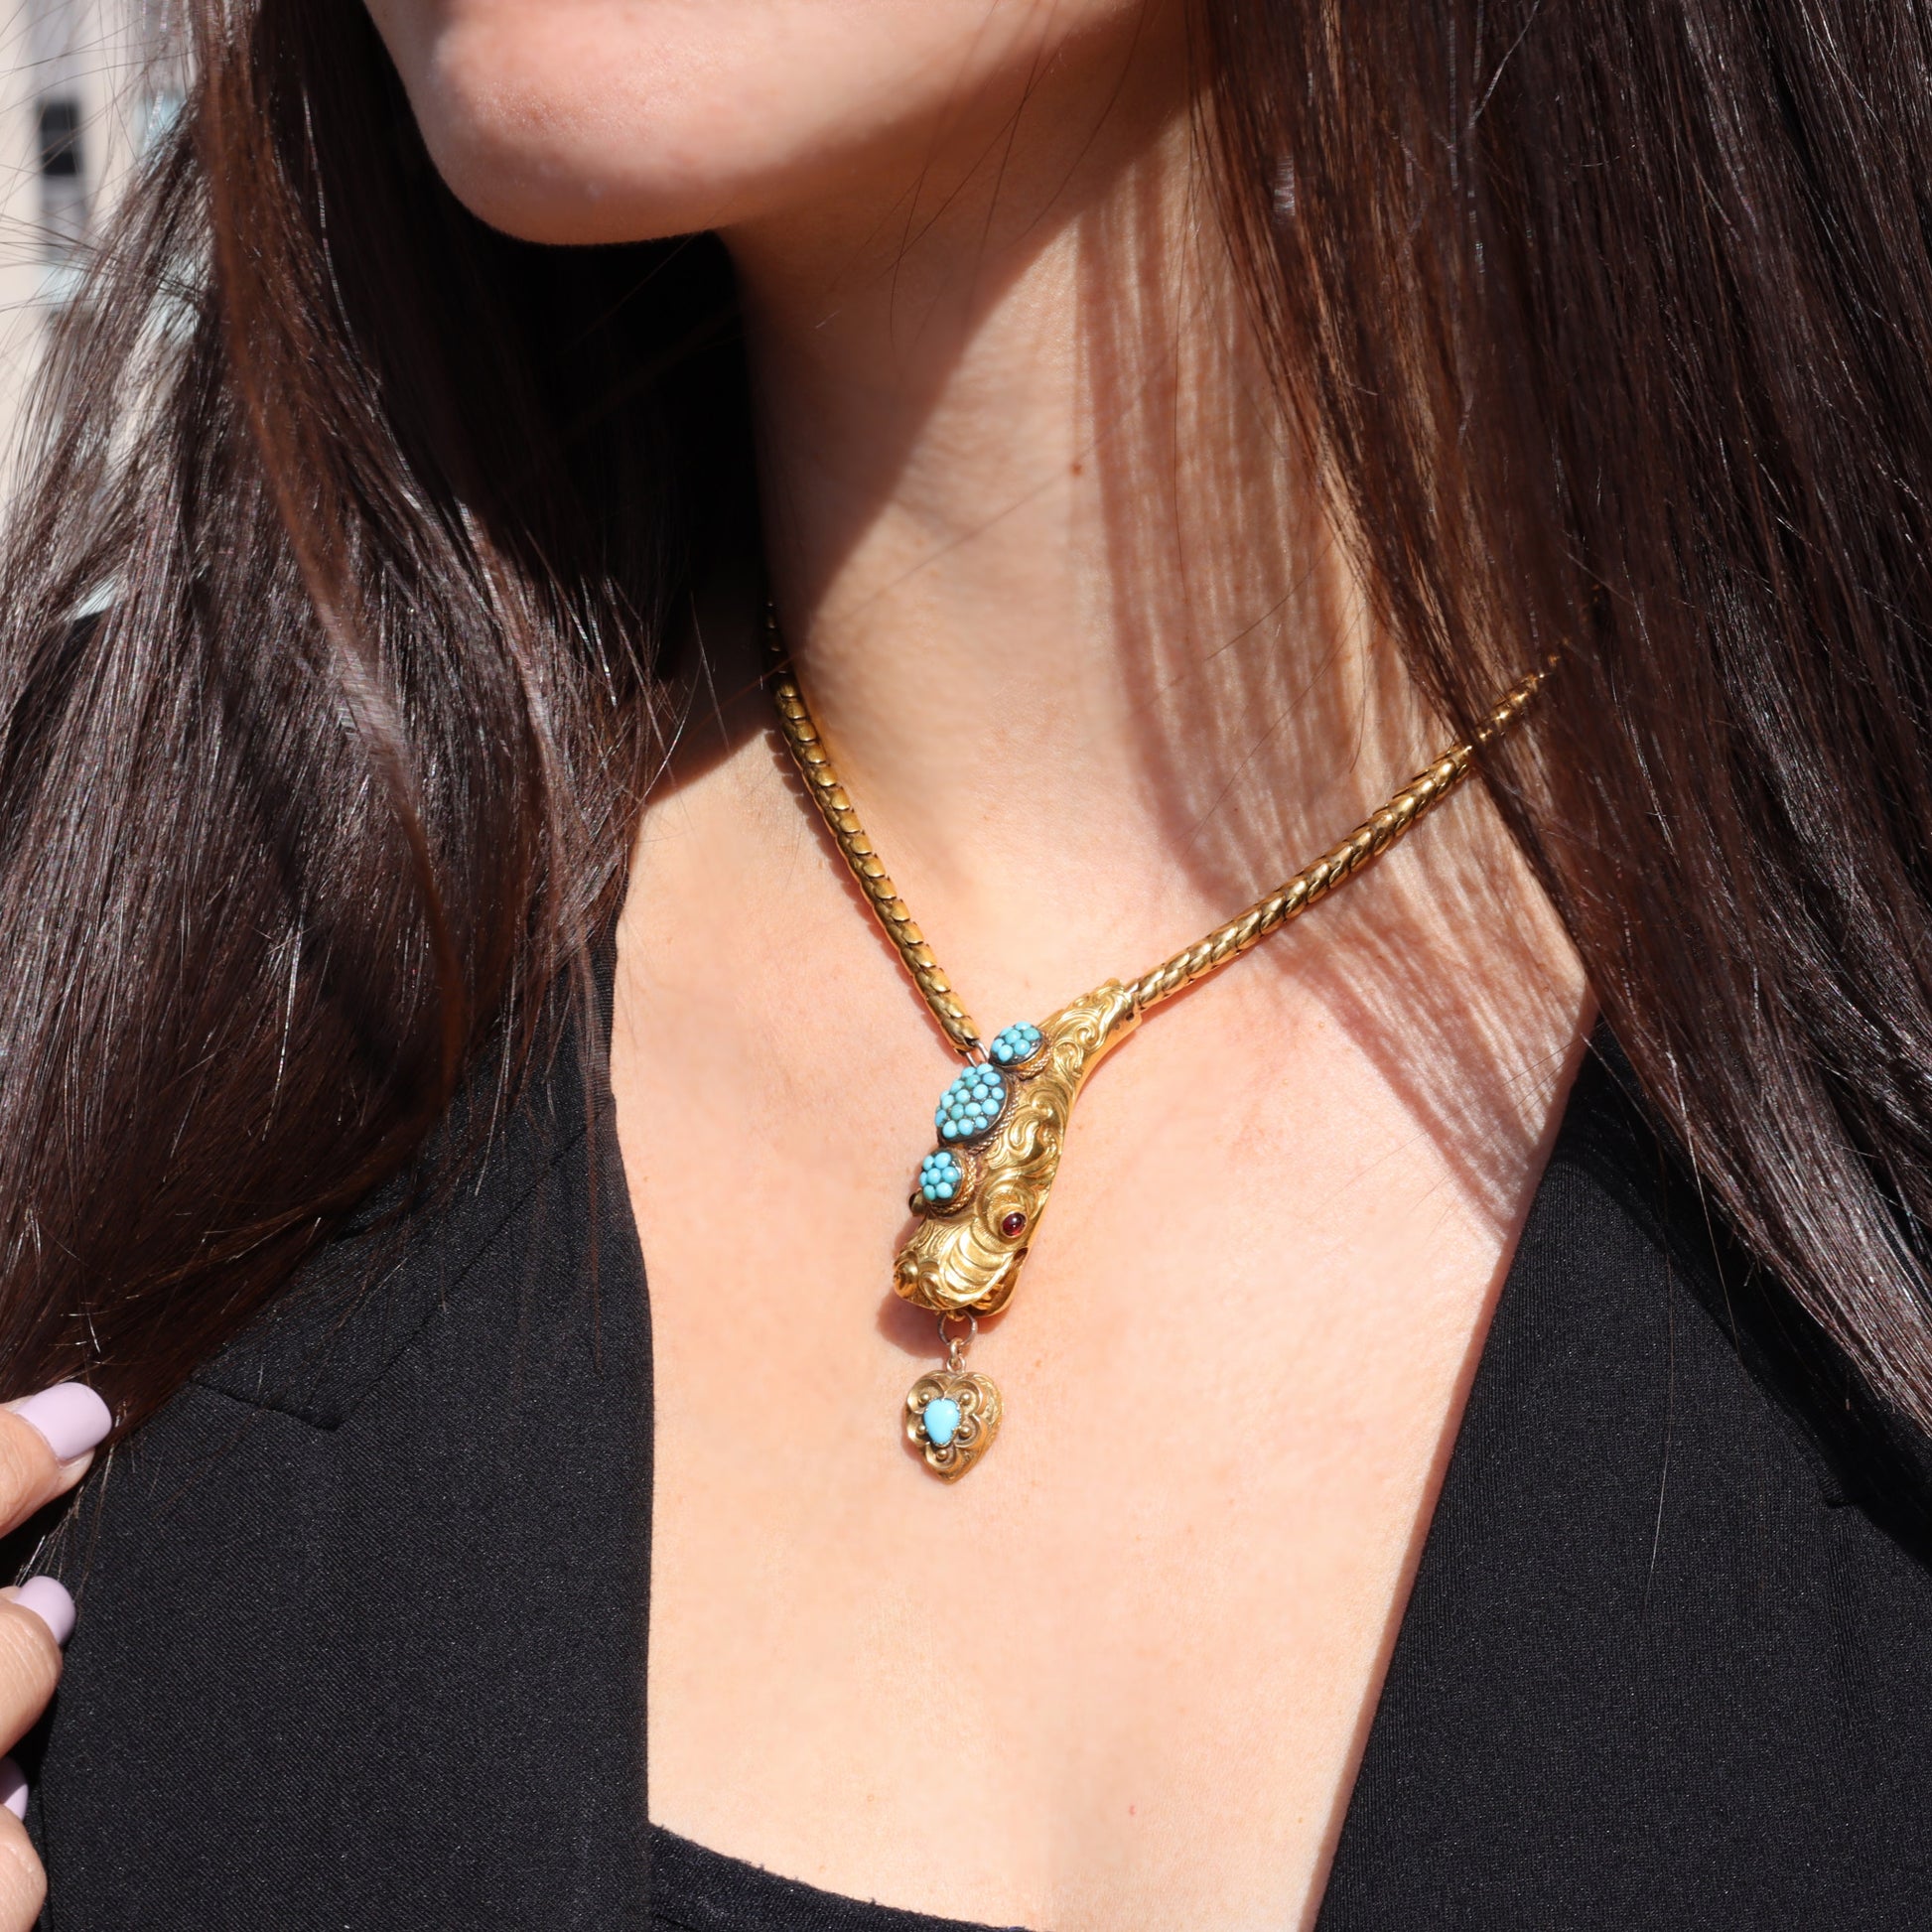 Victorian 18KT Yellow Gold Garnet & Turquoise Snake Necklace on neck